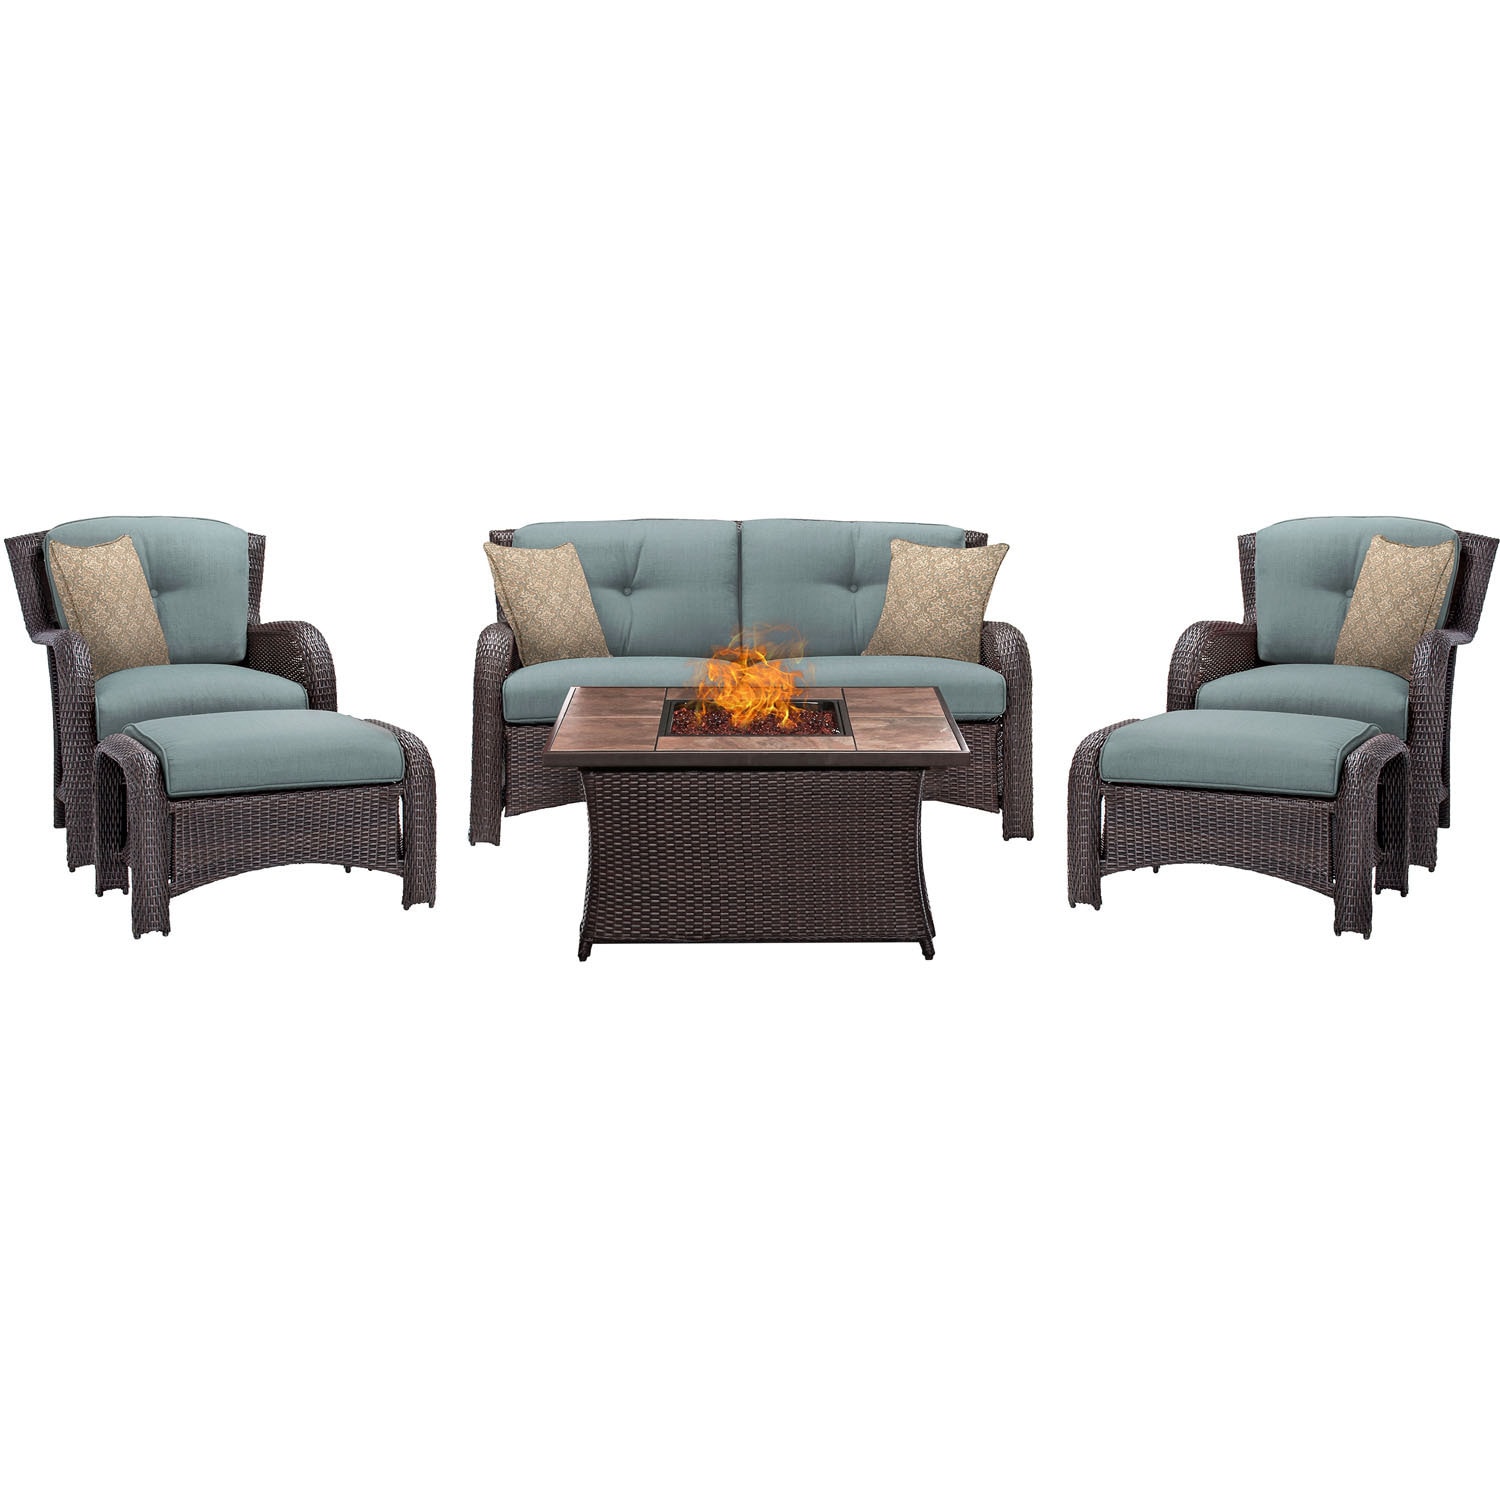 Hanover Outdoor Strathmere 6-piece Lounge Set In Ocean Blue With Fire Pit Table